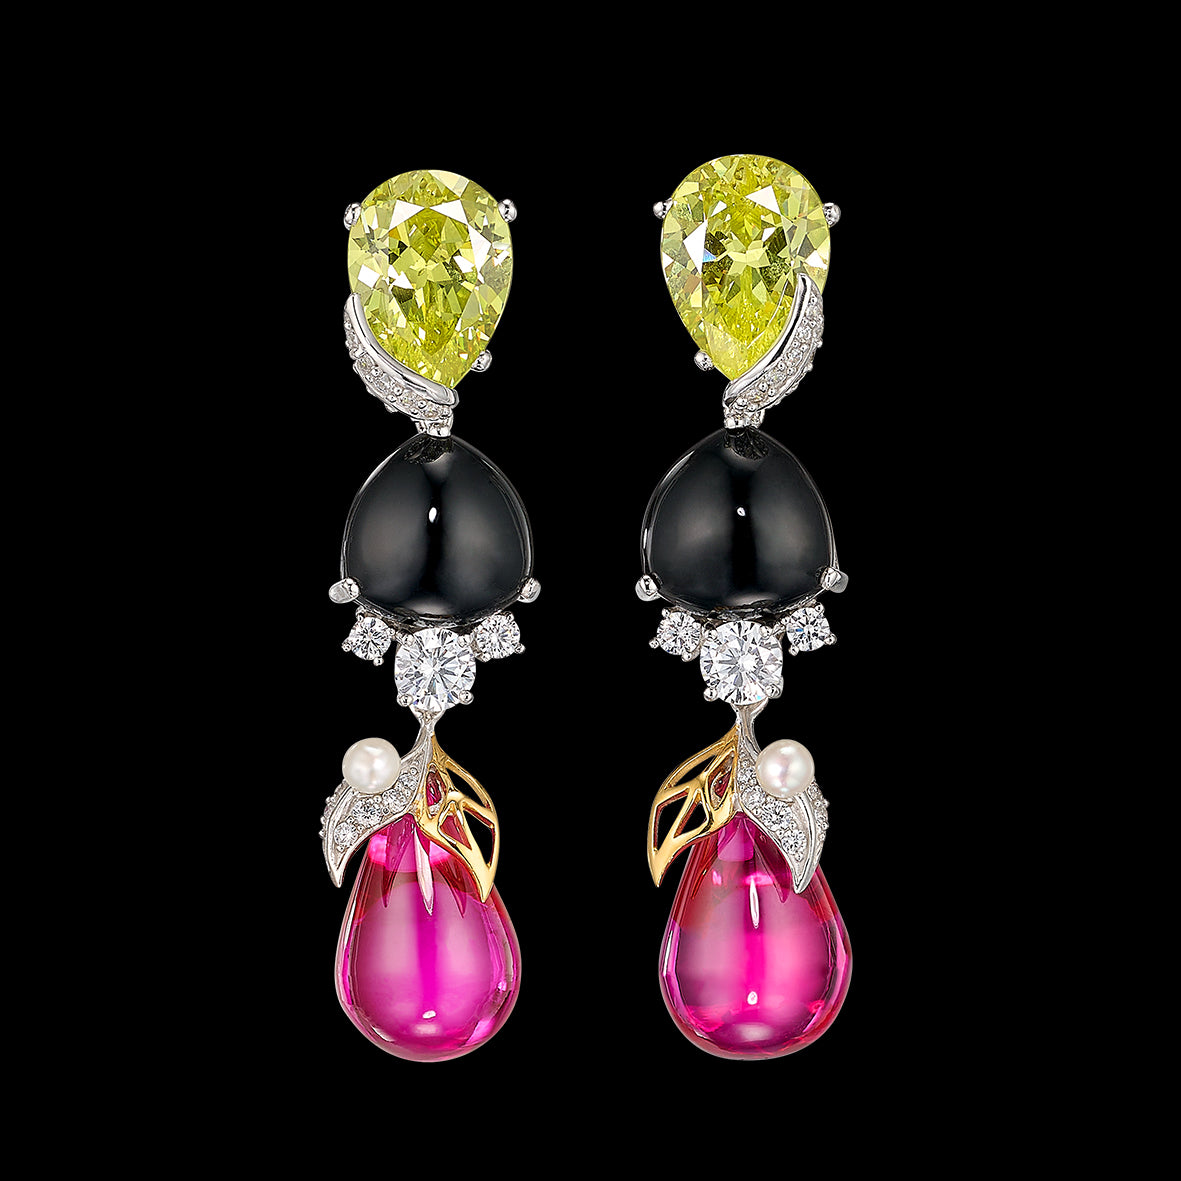 Lemon Fuchsia Berry Drop Earrings, Earrings, Anabela Chan Joaillerie - Fine jewelry with laboratory grown and created gemstones hand-crafted in the United Kingdom. Anabela Chan Joaillerie is the first fine jewellery brand in the world to champion laboratory-grown and created gemstones with high jewellery design, artisanal craftsmanship and a focus on ethical and sustainable innovations.